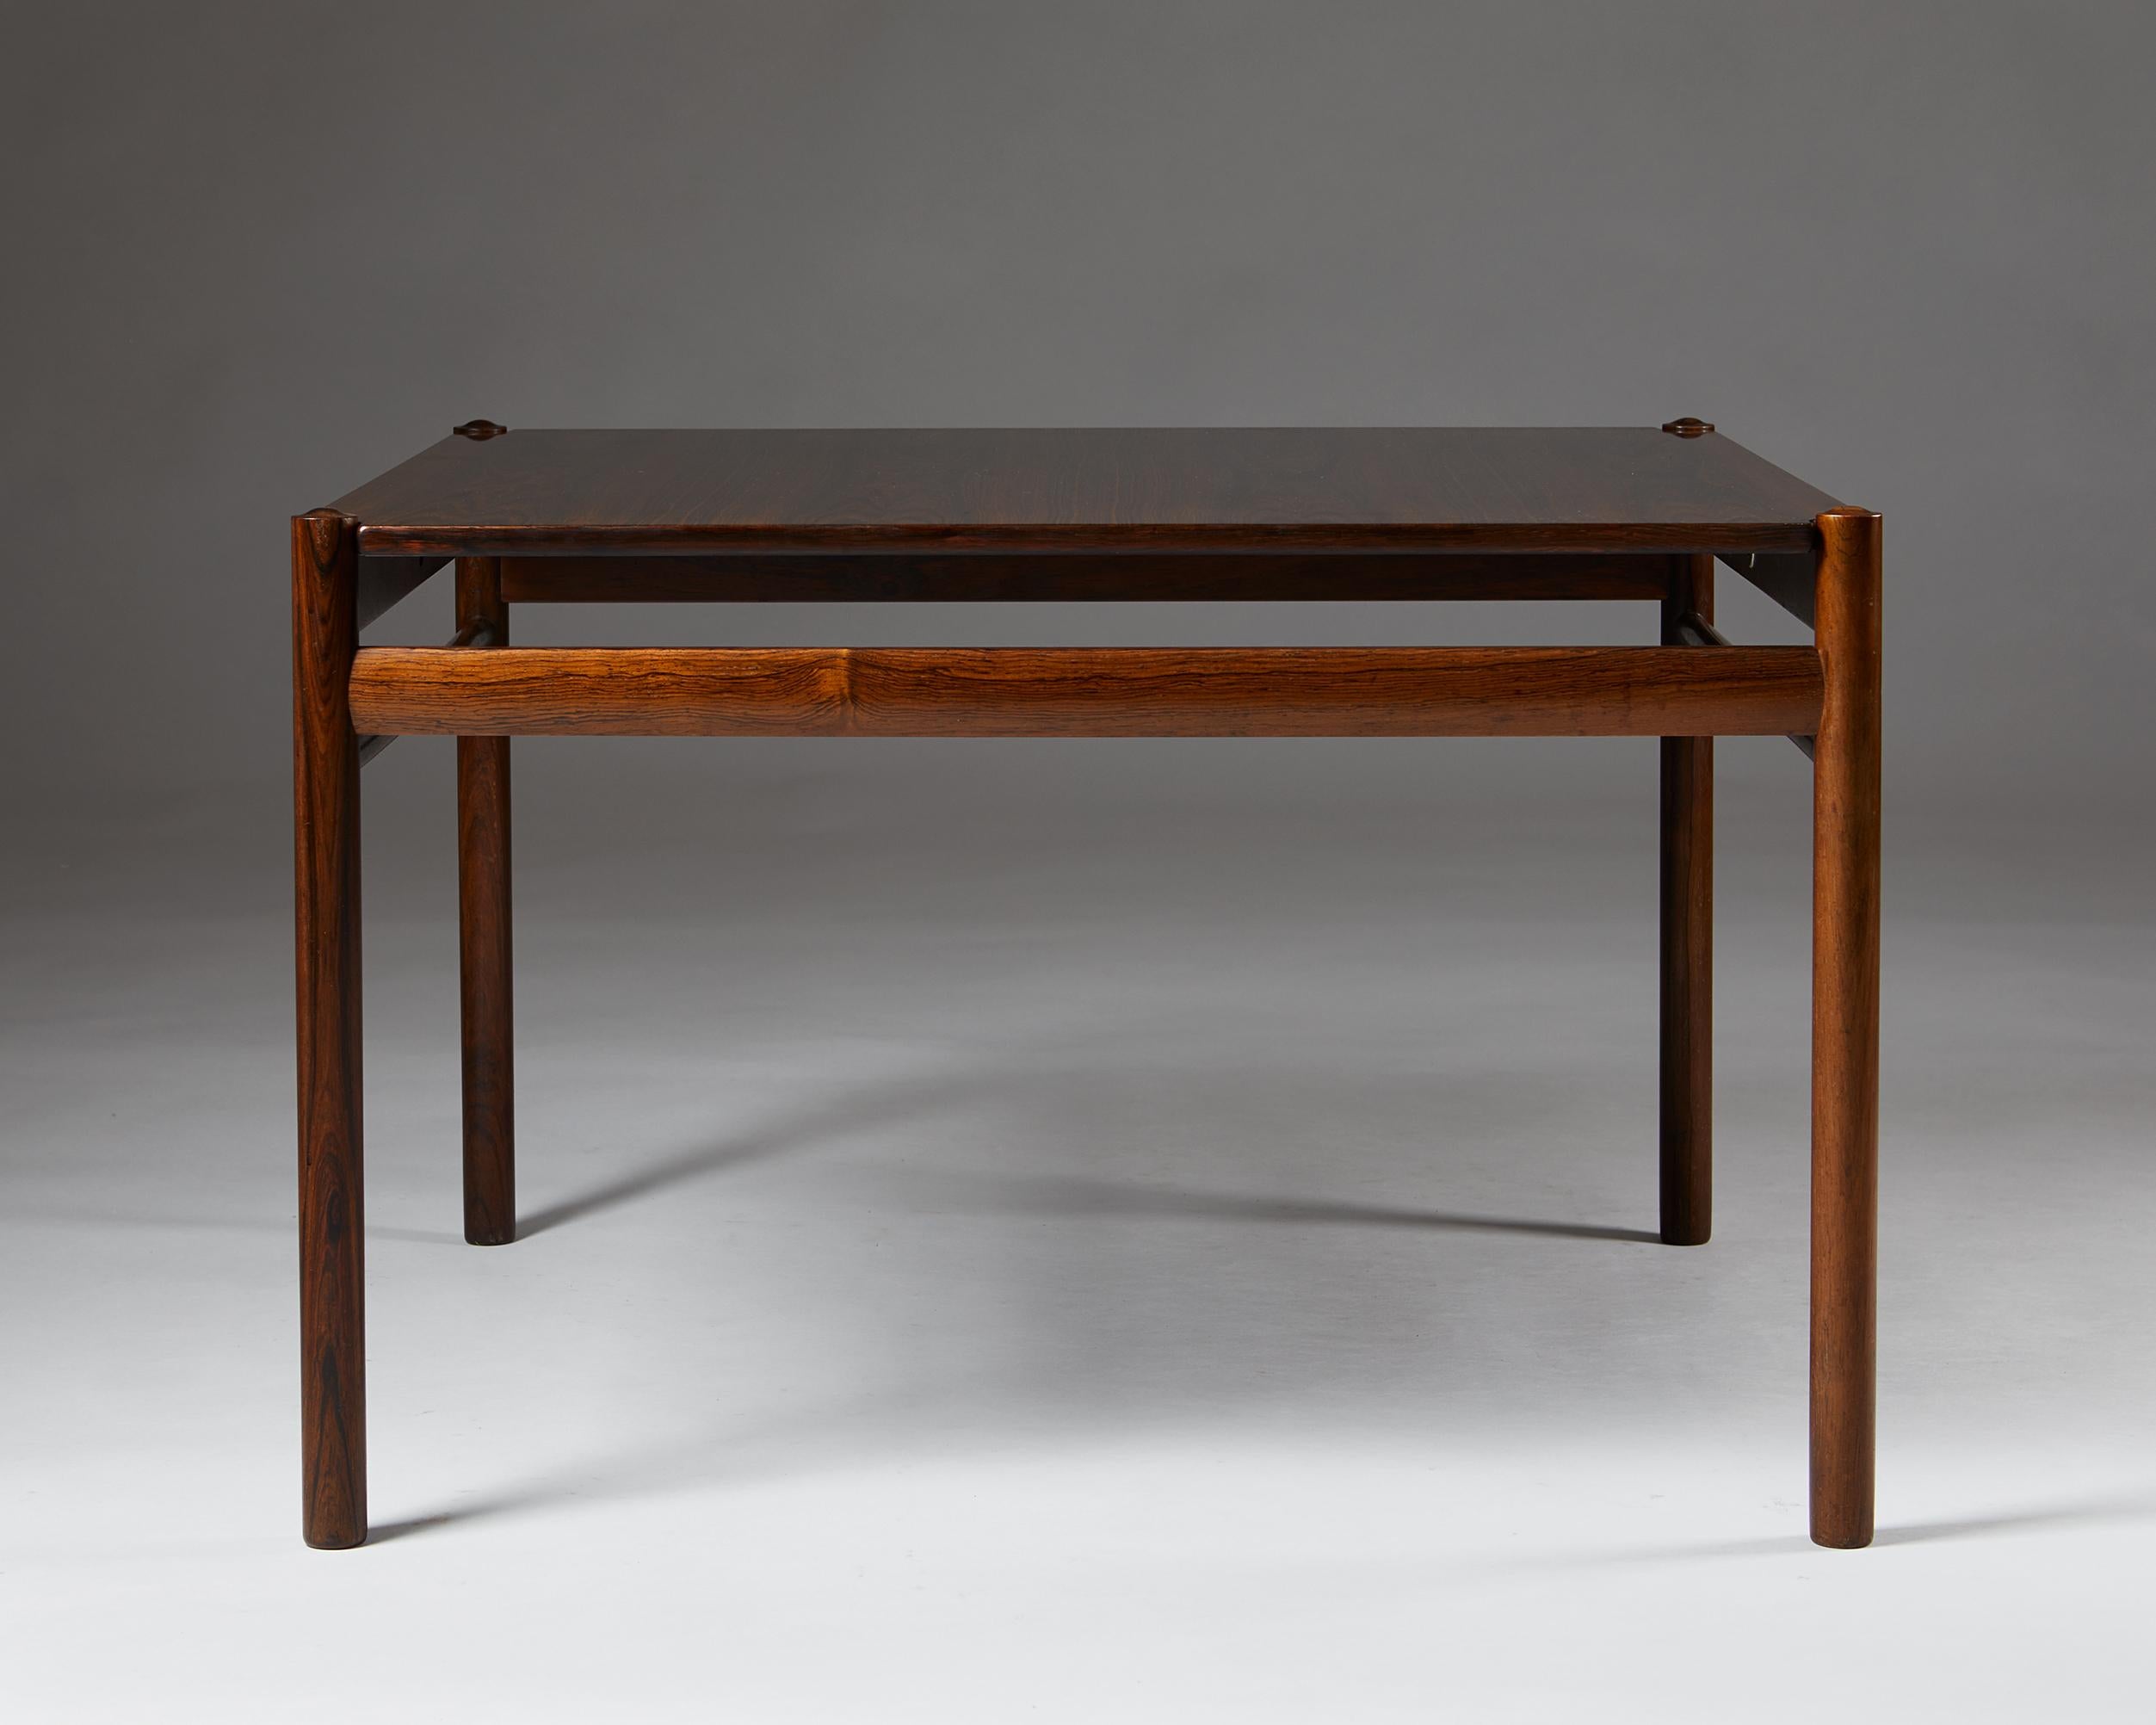 Danish Occasional Table “Colonial” Designed by Ole Wanscher for P. Jeppesen